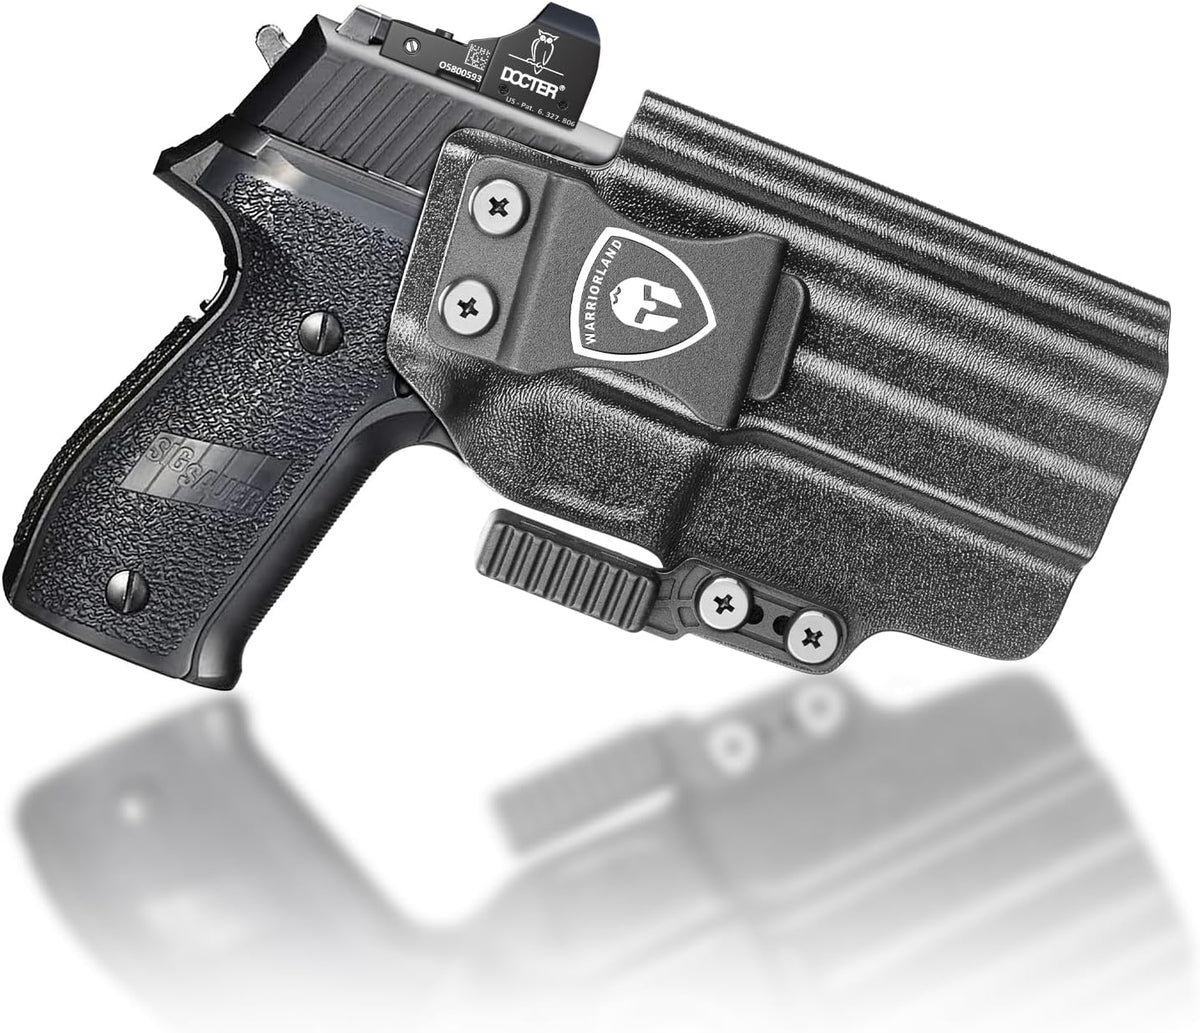 IWB Kydex Holster with Claw Attachment and Optic Cut Fit Sig Sauer P226 Full Size 4.4'' Pistol, Inside Waistband Appendix Carry P266 Holster, Adj. Cant & Retention, Right Hand|WARRIORLAND